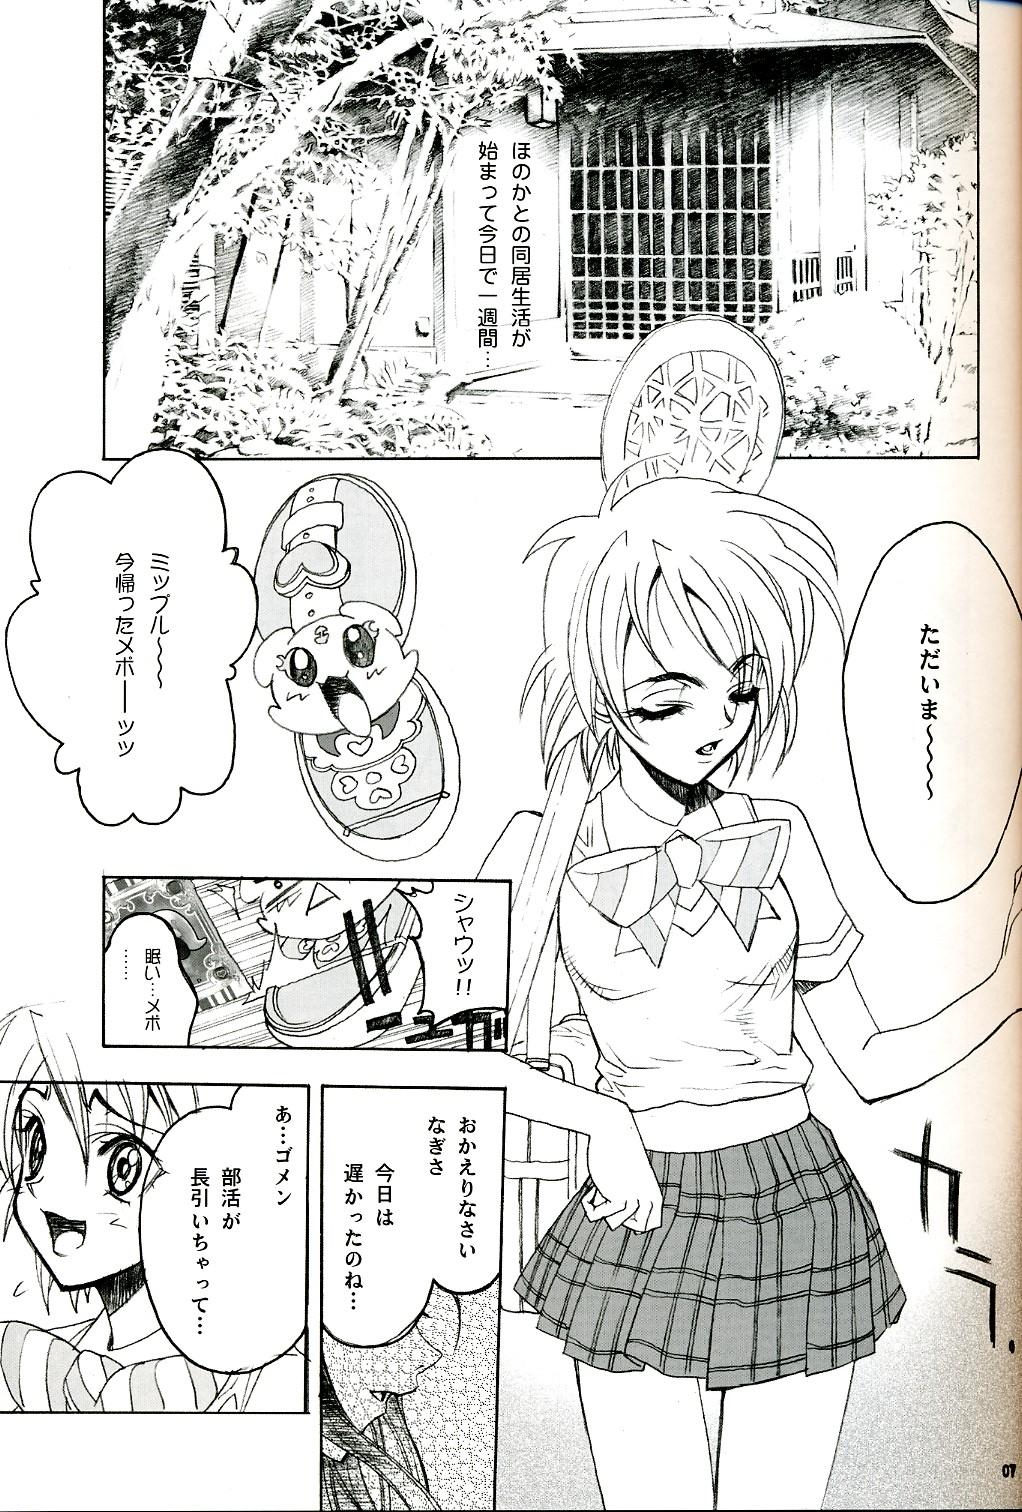 Special Locations SOS ROMANTIC - Pretty cure Passionate - Page 6